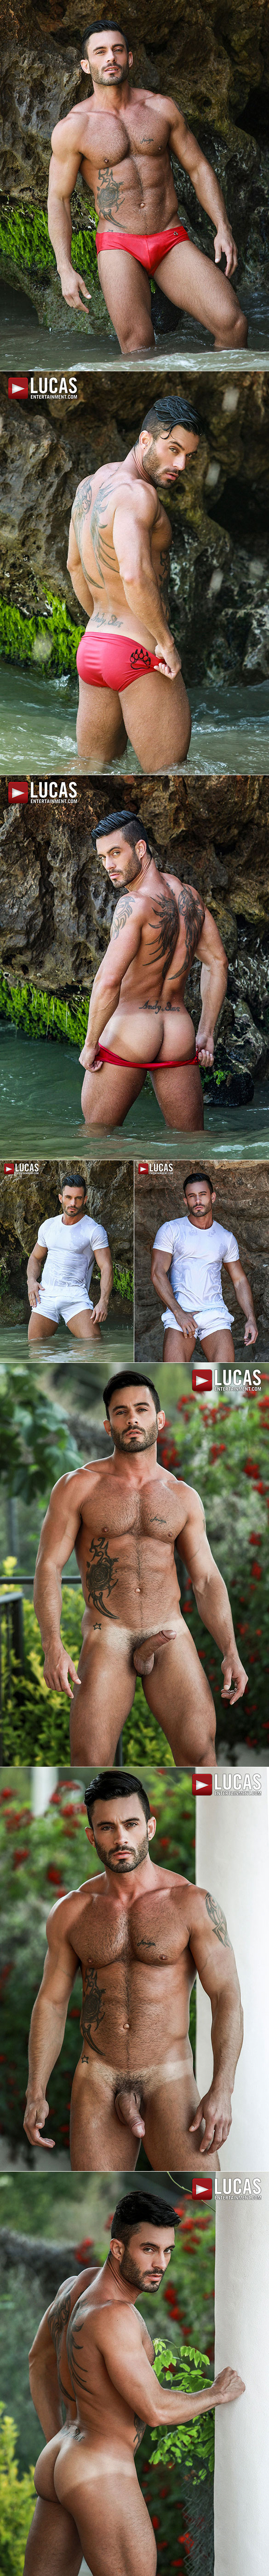 Lucas Entertainment: Andrea Suarez, Andy Star and James Castle's raw threesome in "Bareback Pool Party"